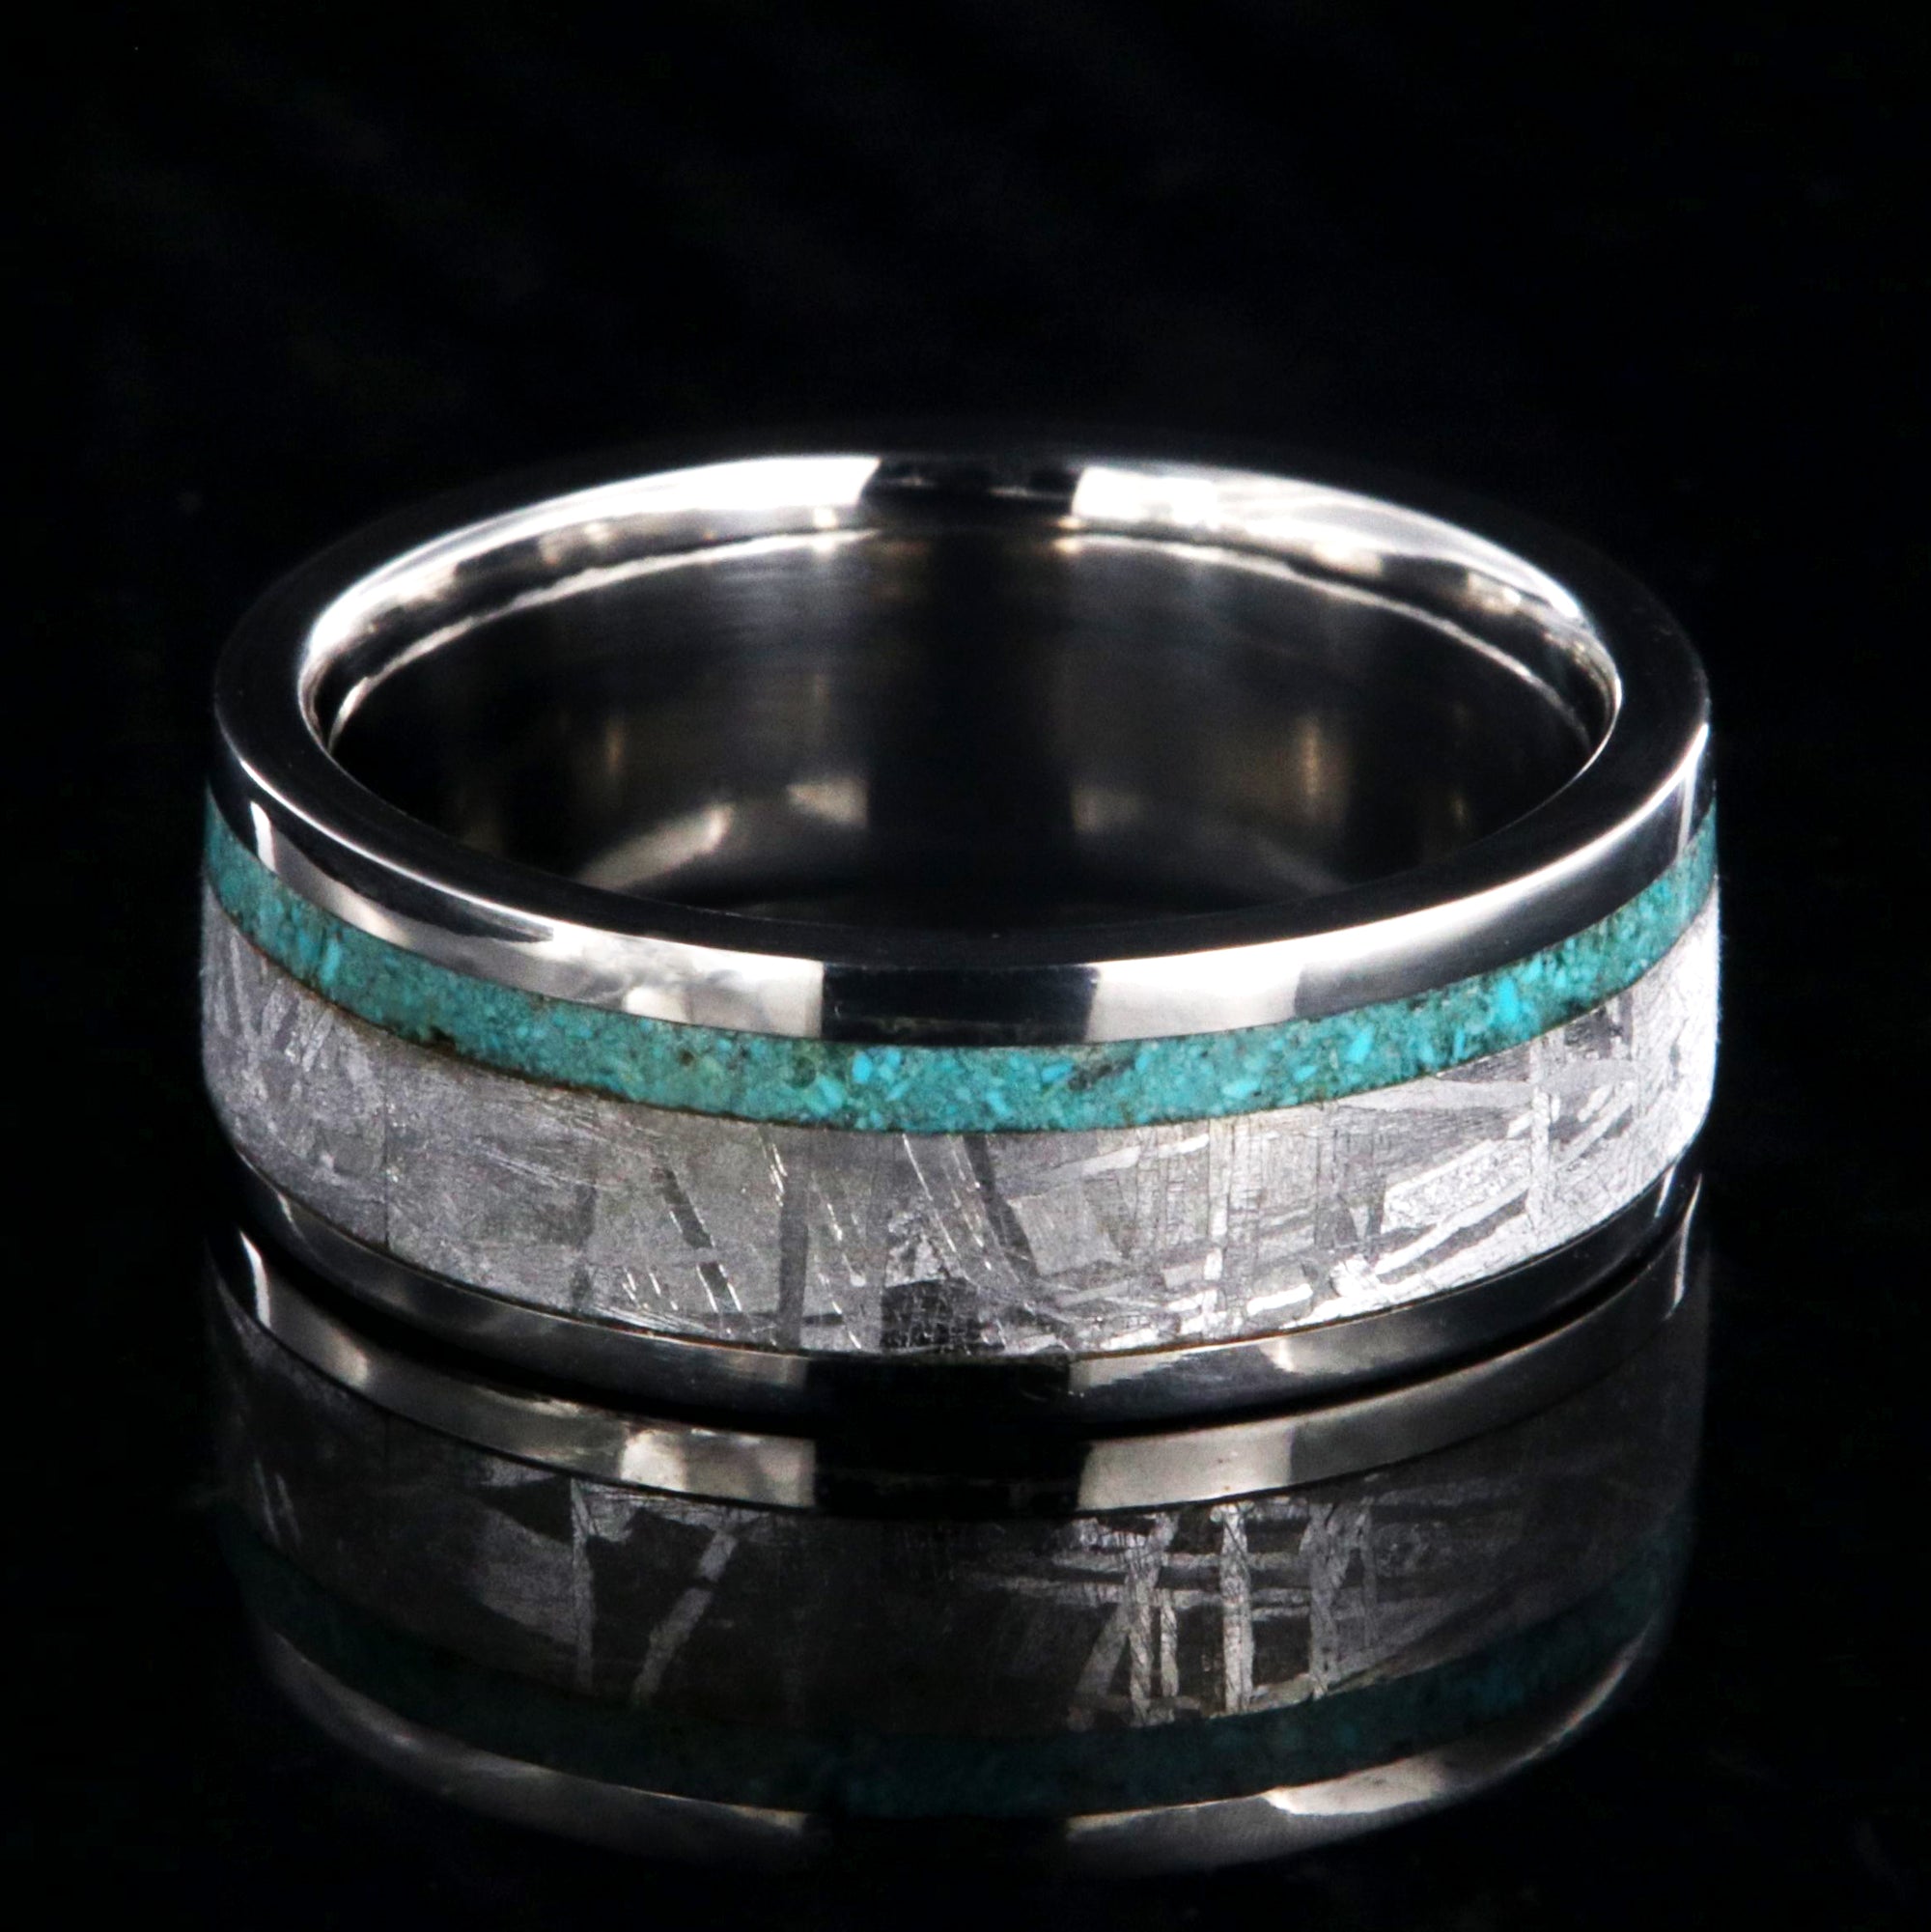 7mm wide cobalt ring with meteorite and a thin turquoise edge inlay